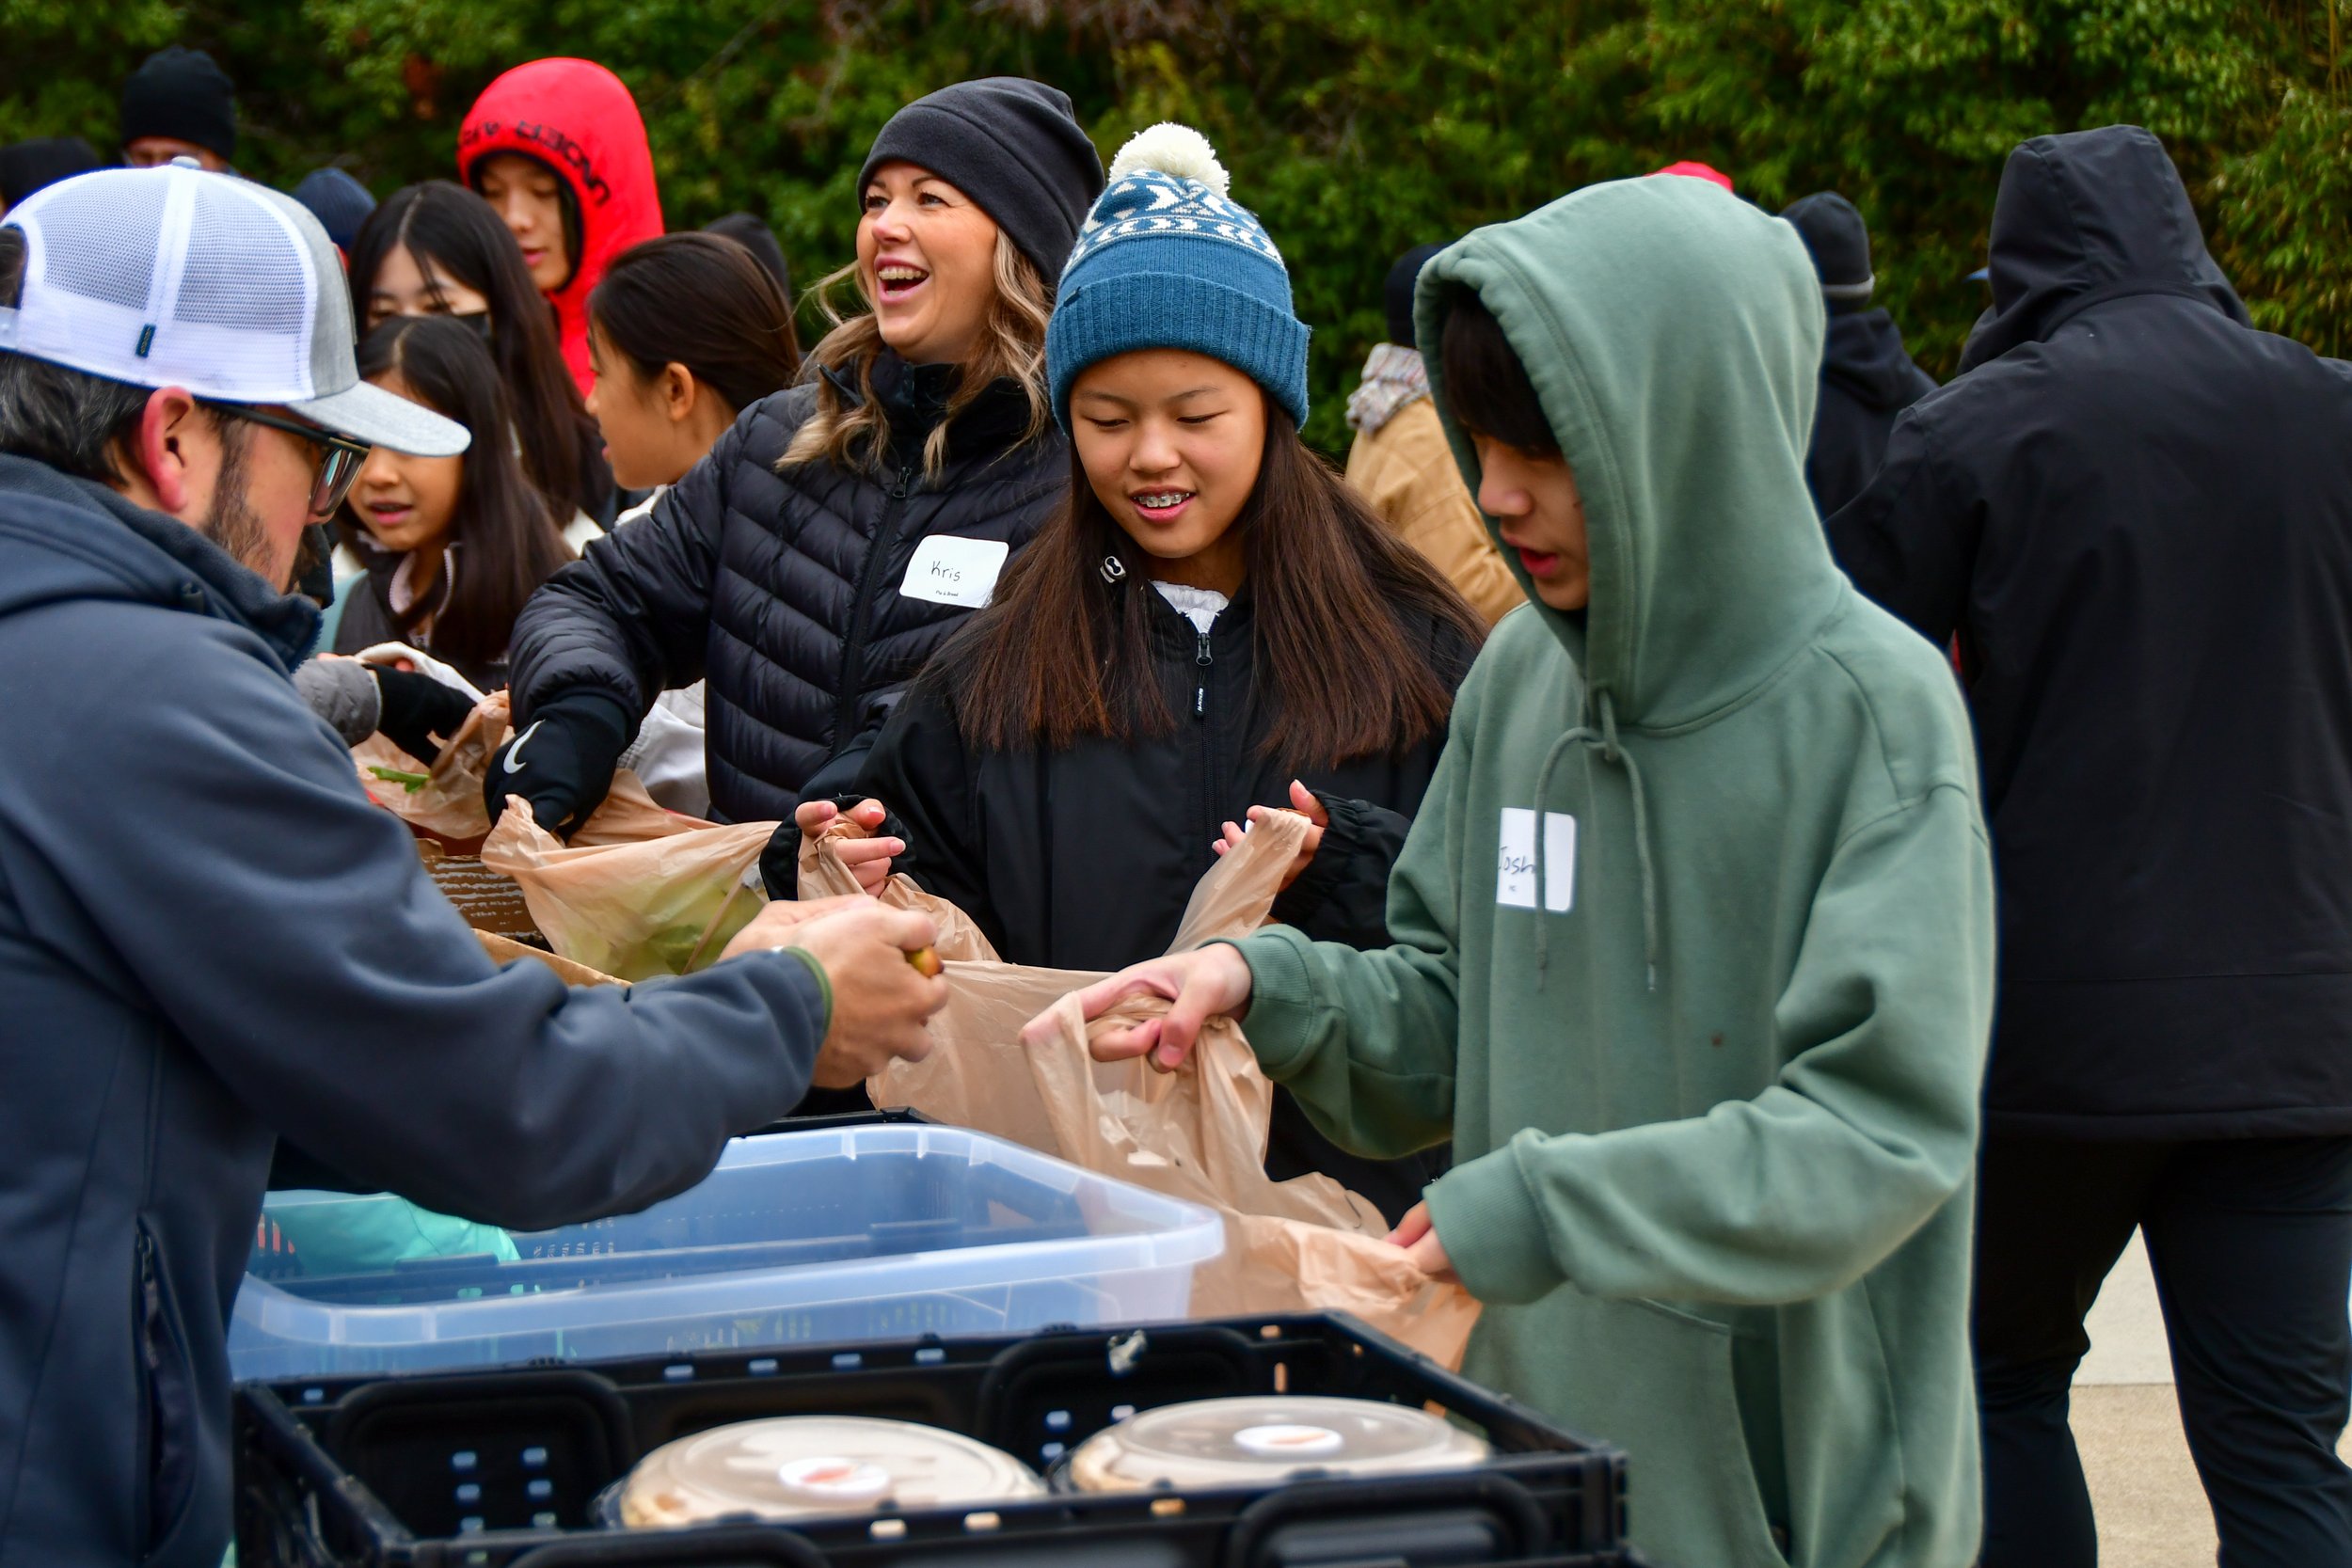 Volunteers assisting at packing table during a food distribution.